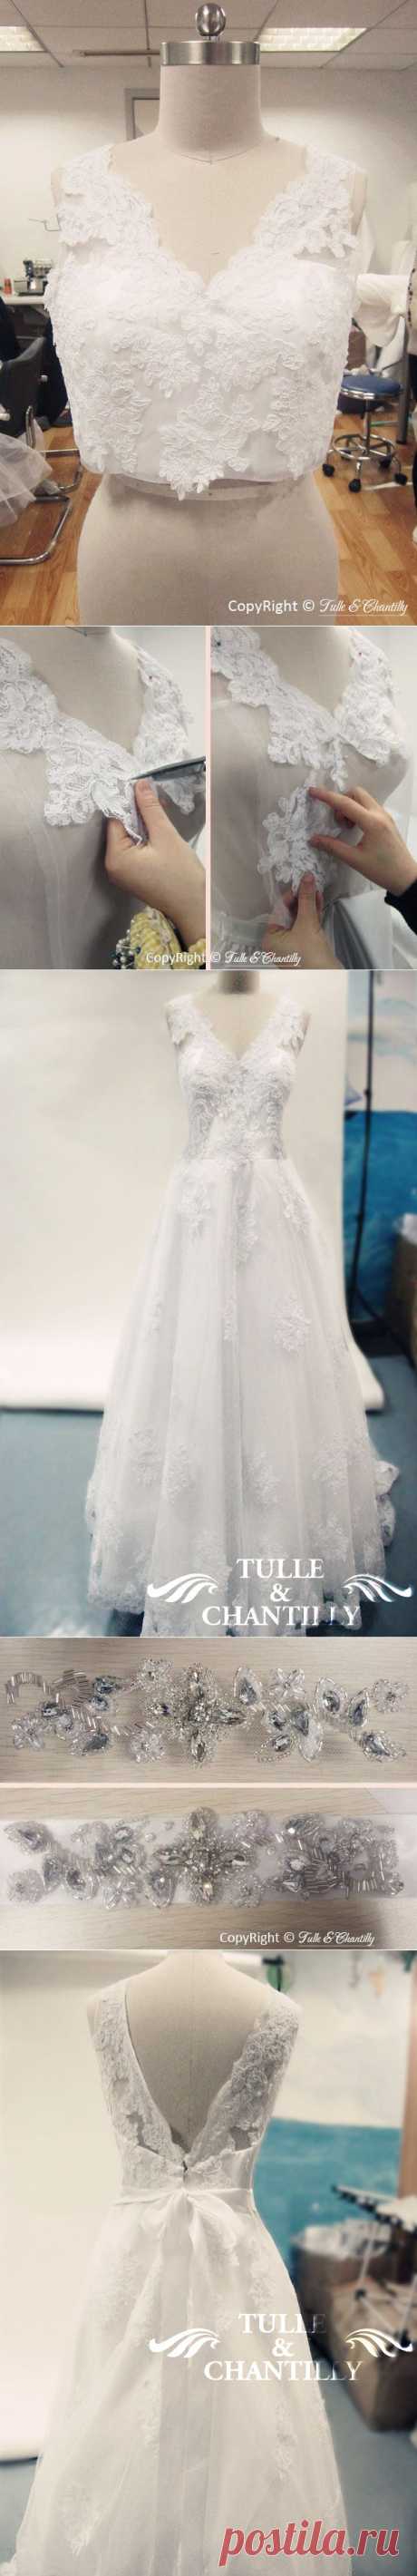 {Process Show Time} Vintage Lace Wedding Dress With Pretty Beaded Sash | TulleandChantilly.com